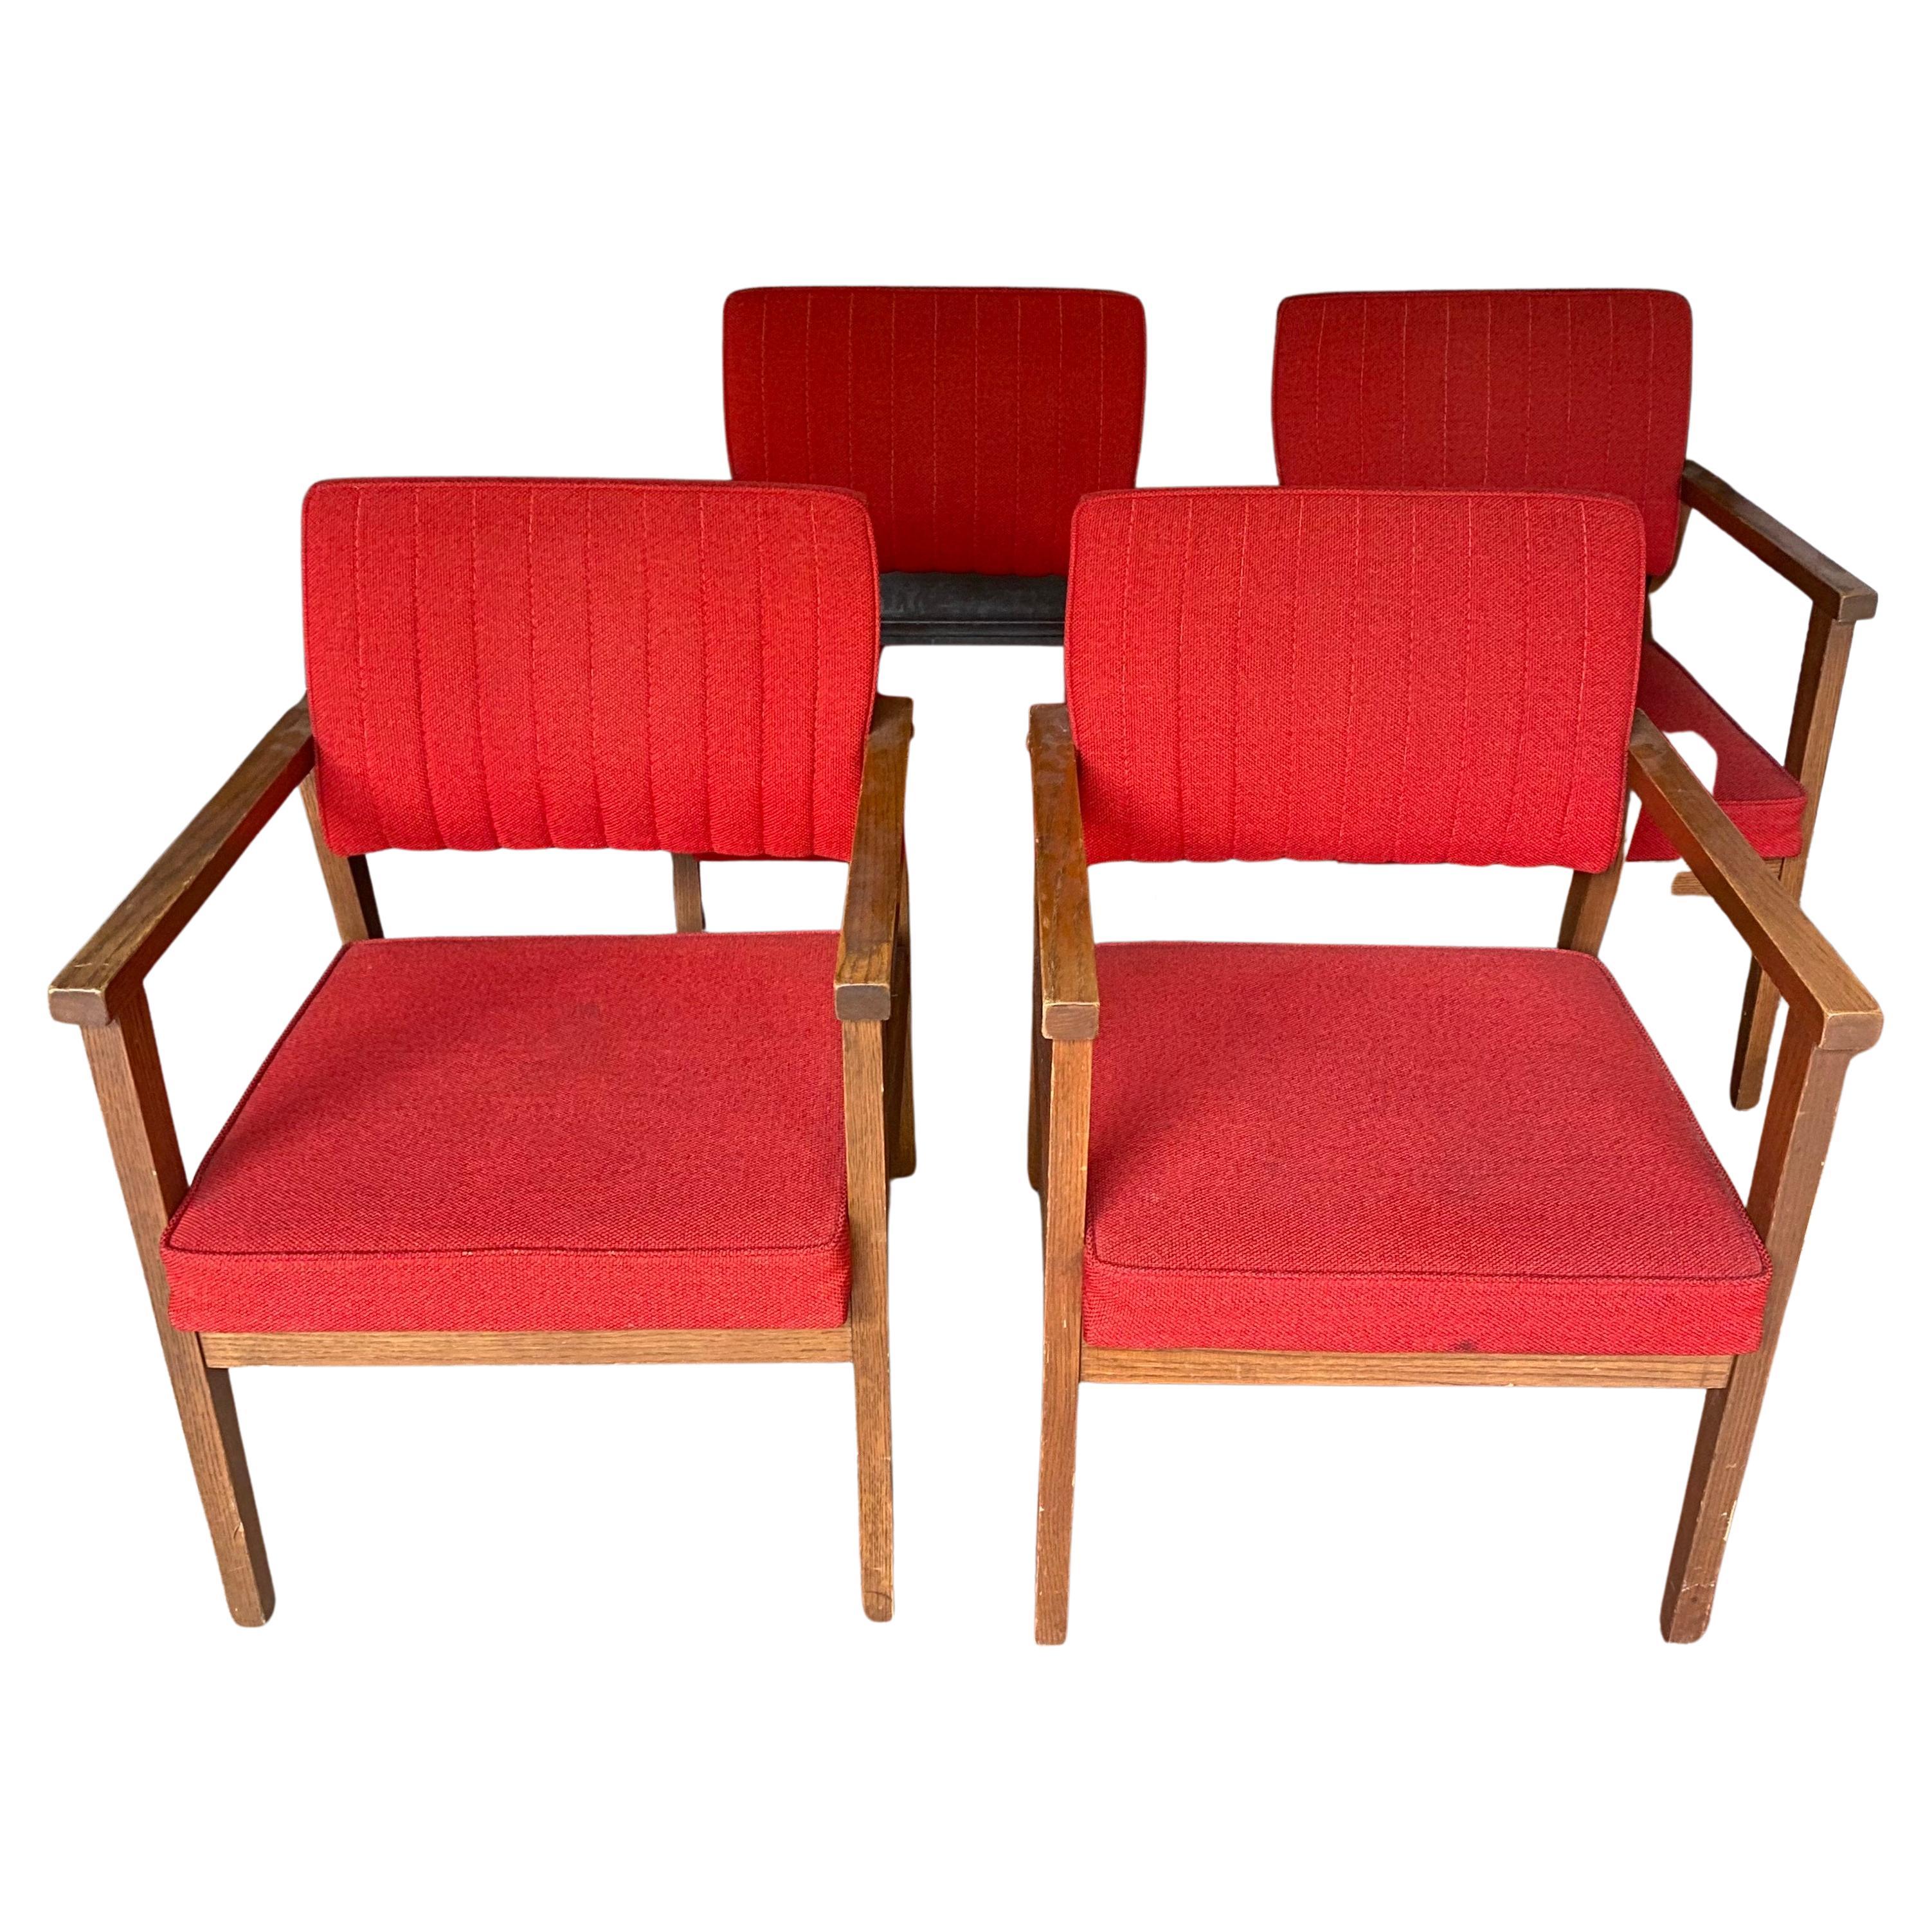 Suite of 4 Red Armchairs Rosewood / Red Jersey Canadian Atlas Furniture For Sale